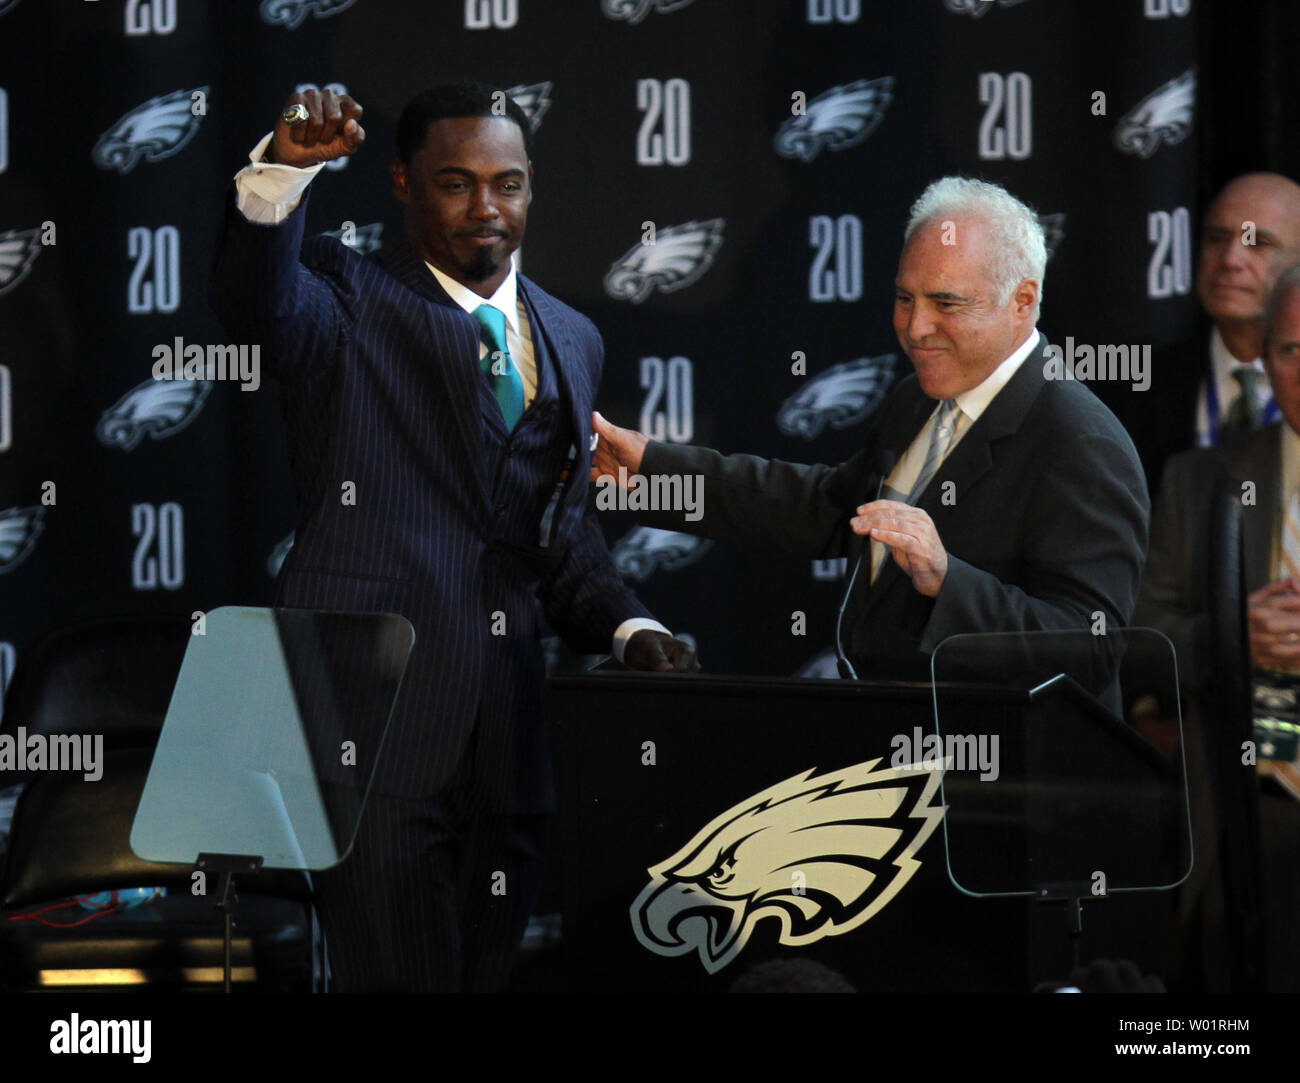 Former Philadelphia Eagles player Brian Dawkins cheers the crowd with Eagles' owner Jeffrey Lurie after retiring his number to the Eagles Hall of Fame at Lincoln Financial Field in Philadelphia on September 30, 2012.  UPI/Laurence Kesterson Stock Photo